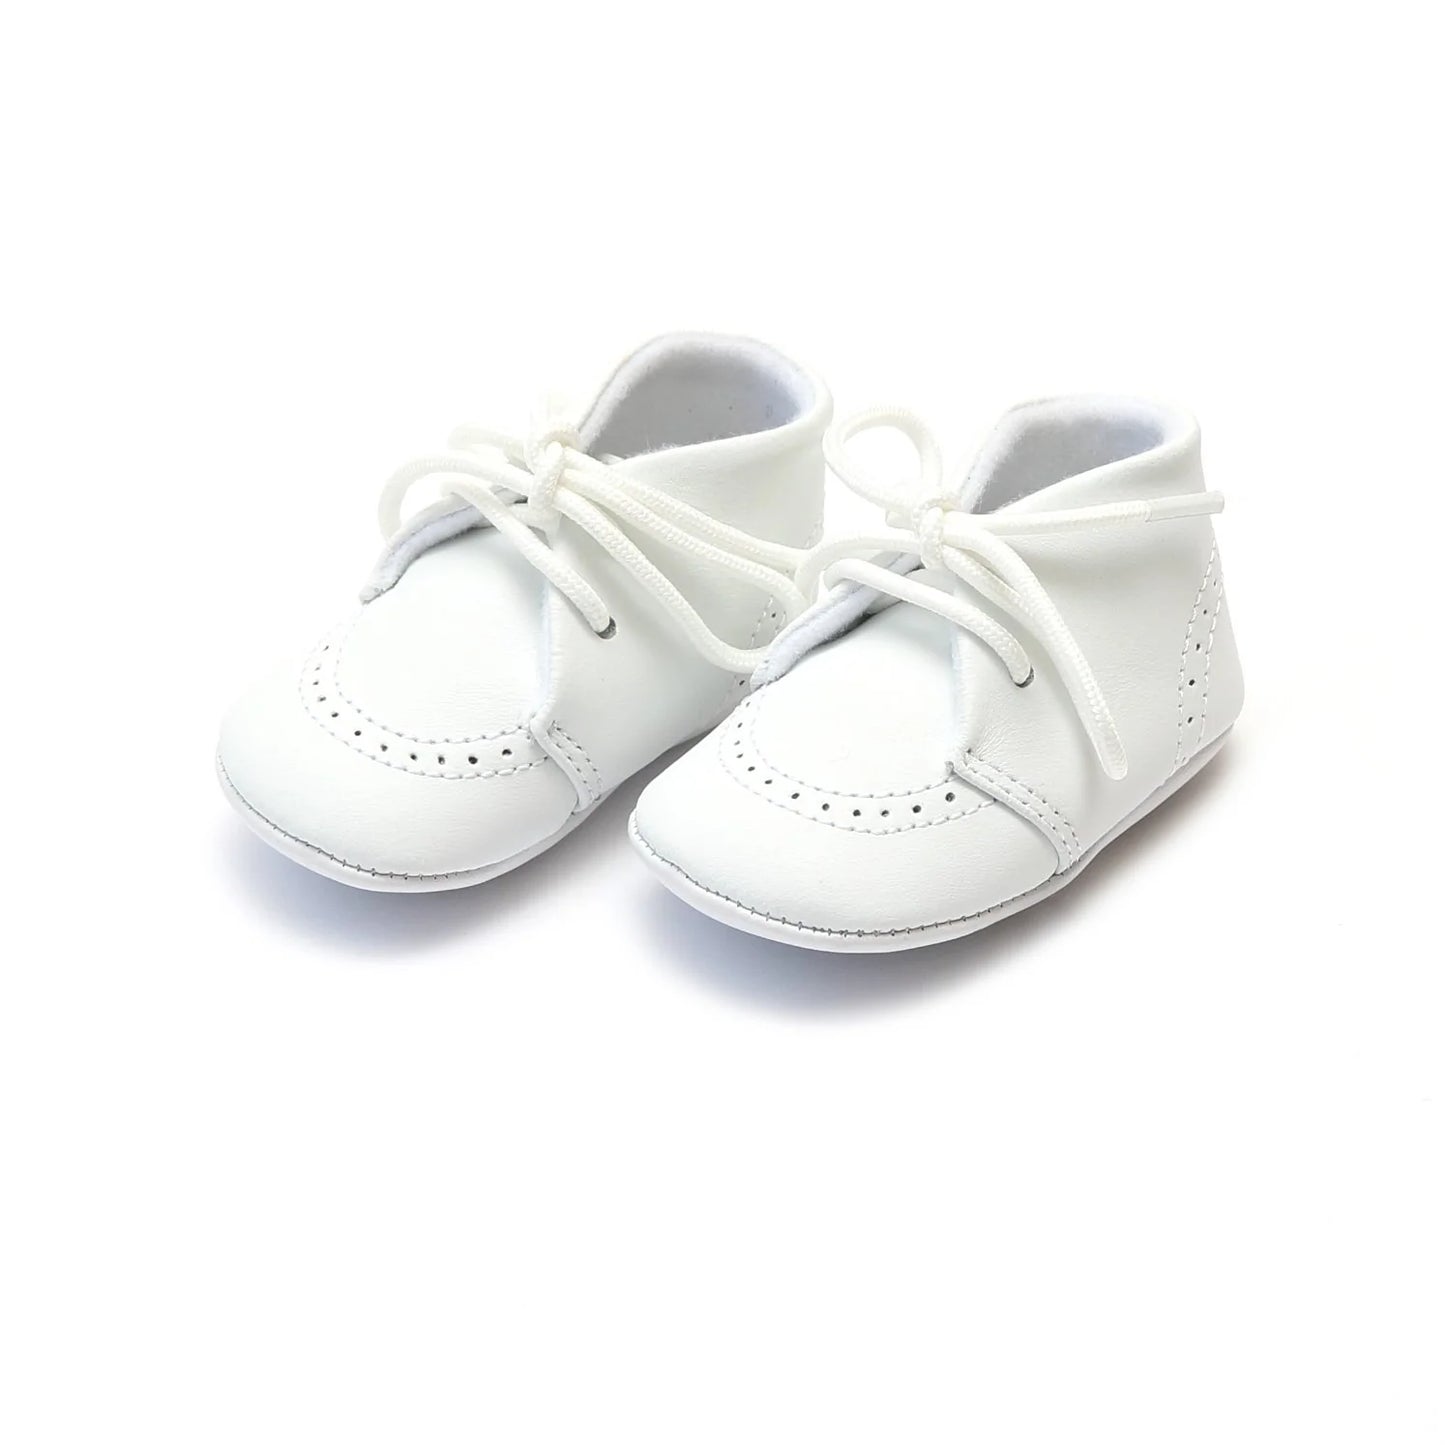 Benny Leather Infant Bootie